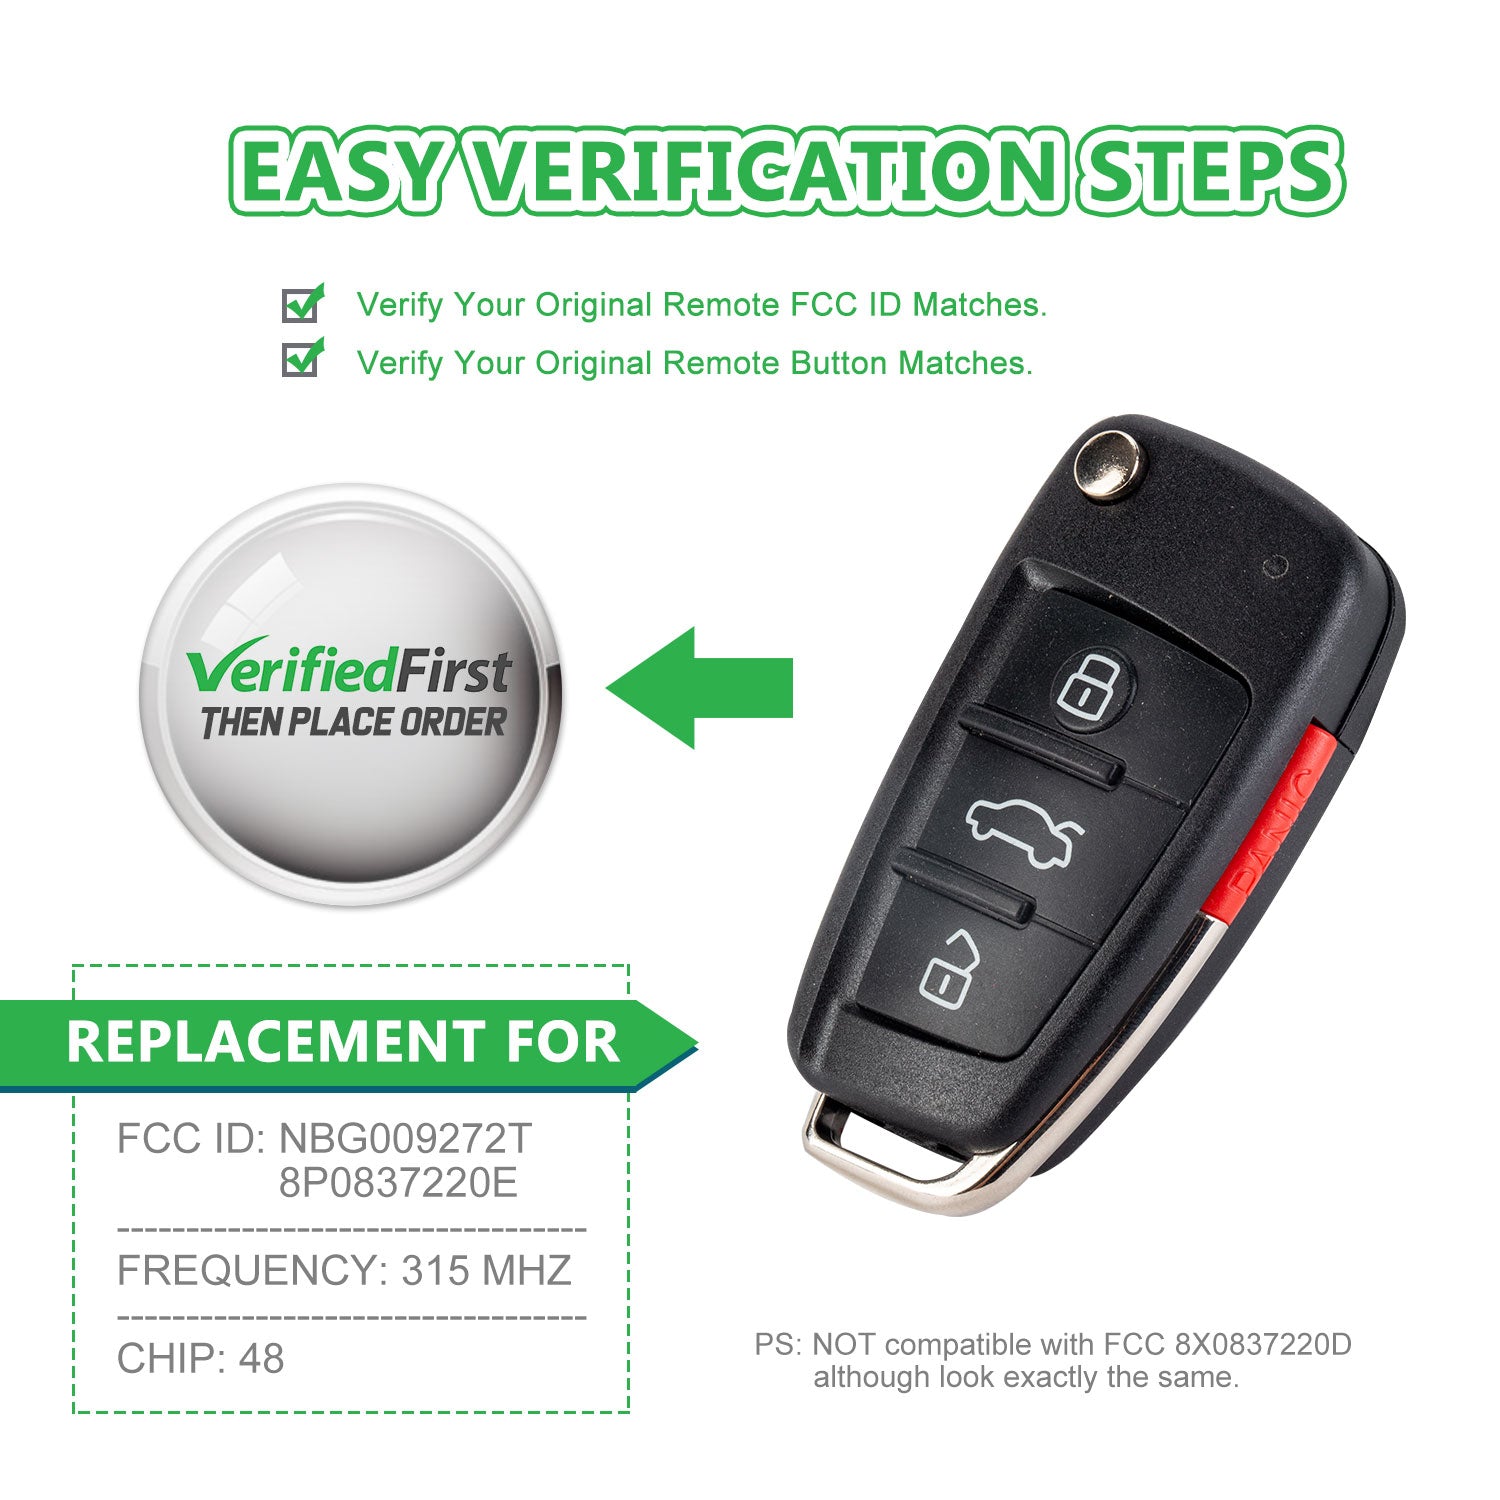 Lots of 5 Extra-Partss Smart Remote Car Key Fob Replacement for Audi NBG009272T 8P0837220E fits 2007 2008 2009 2010 A3 TT